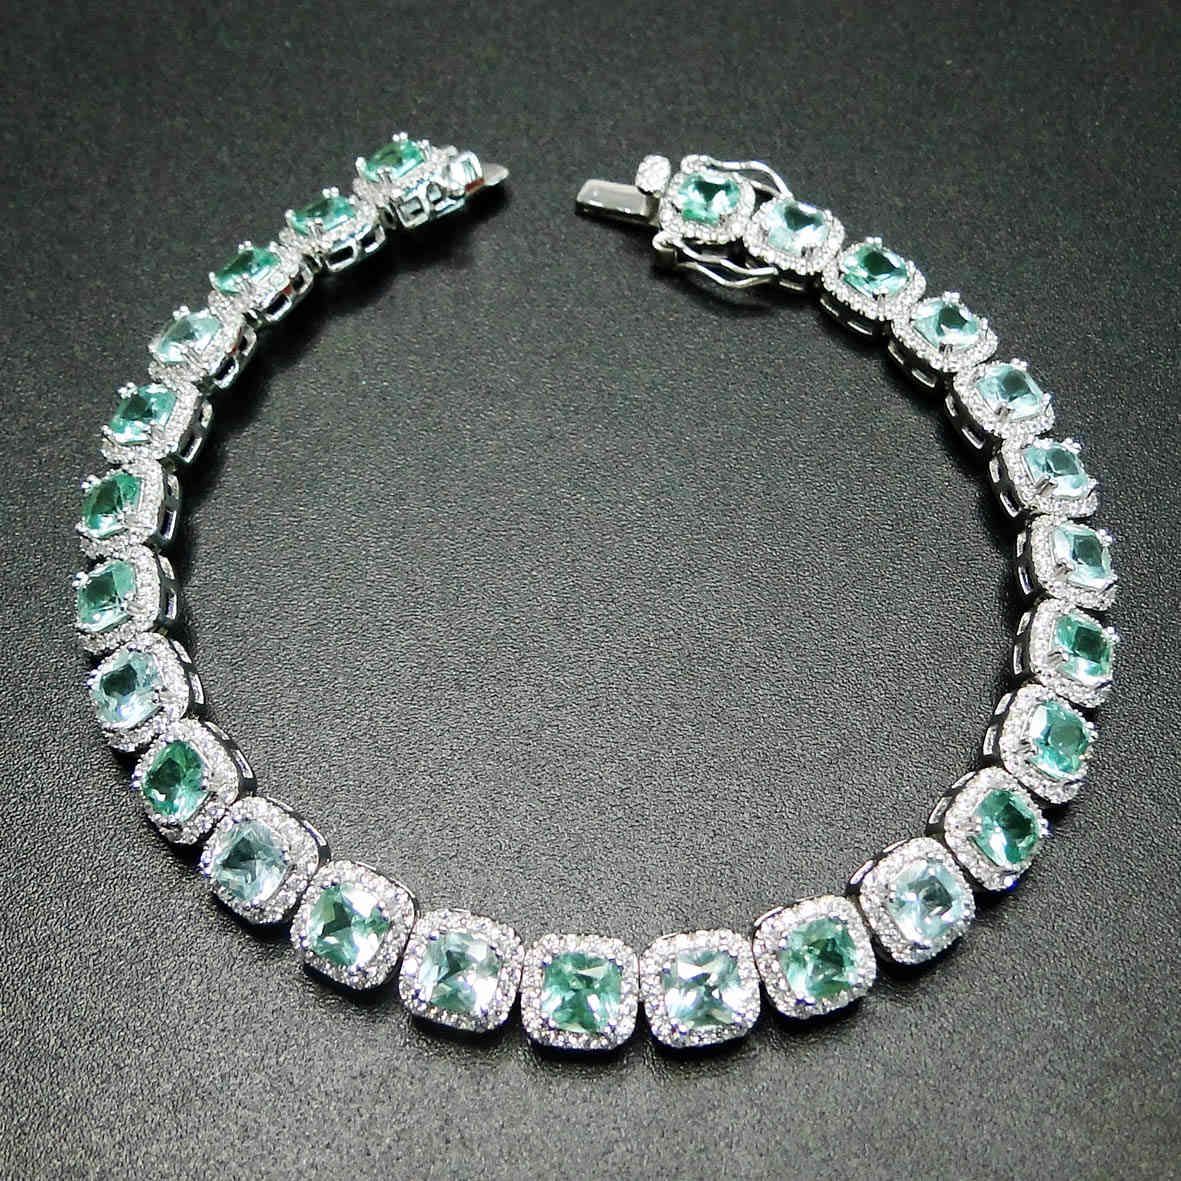 Green Spinel-7.5inches